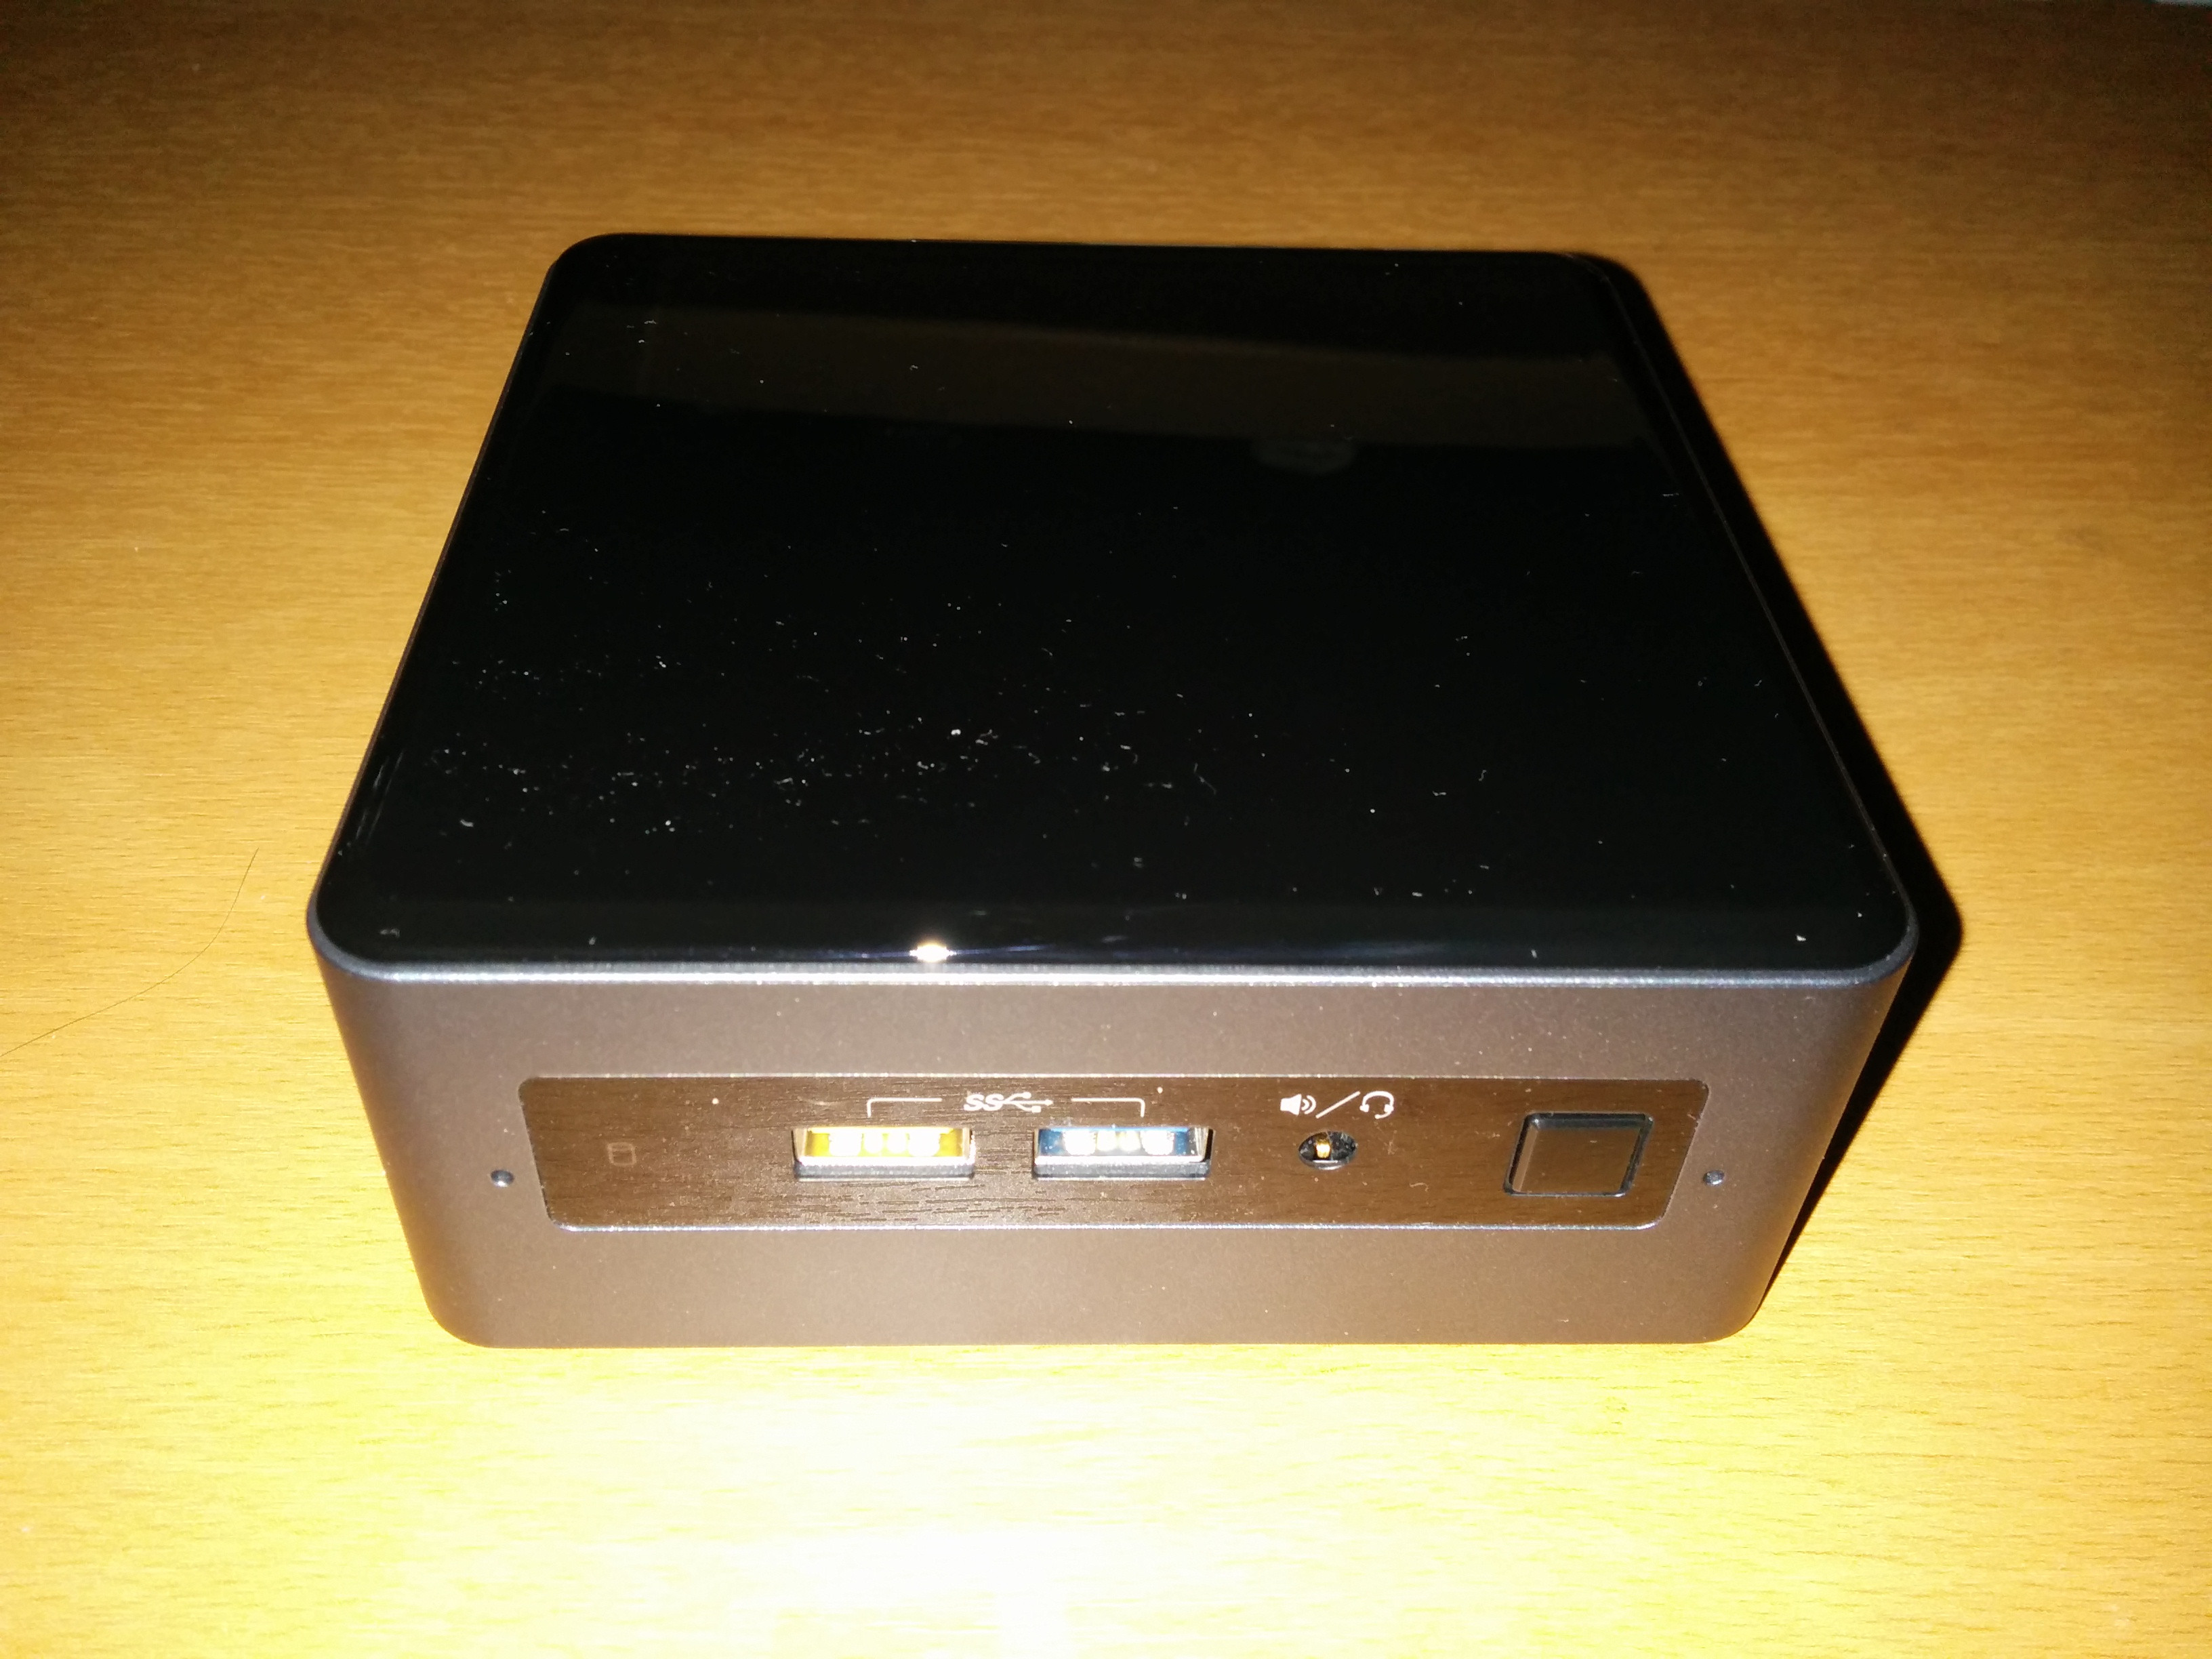 No more NUC: Intel's weirdly named mini PCs seem to be going away